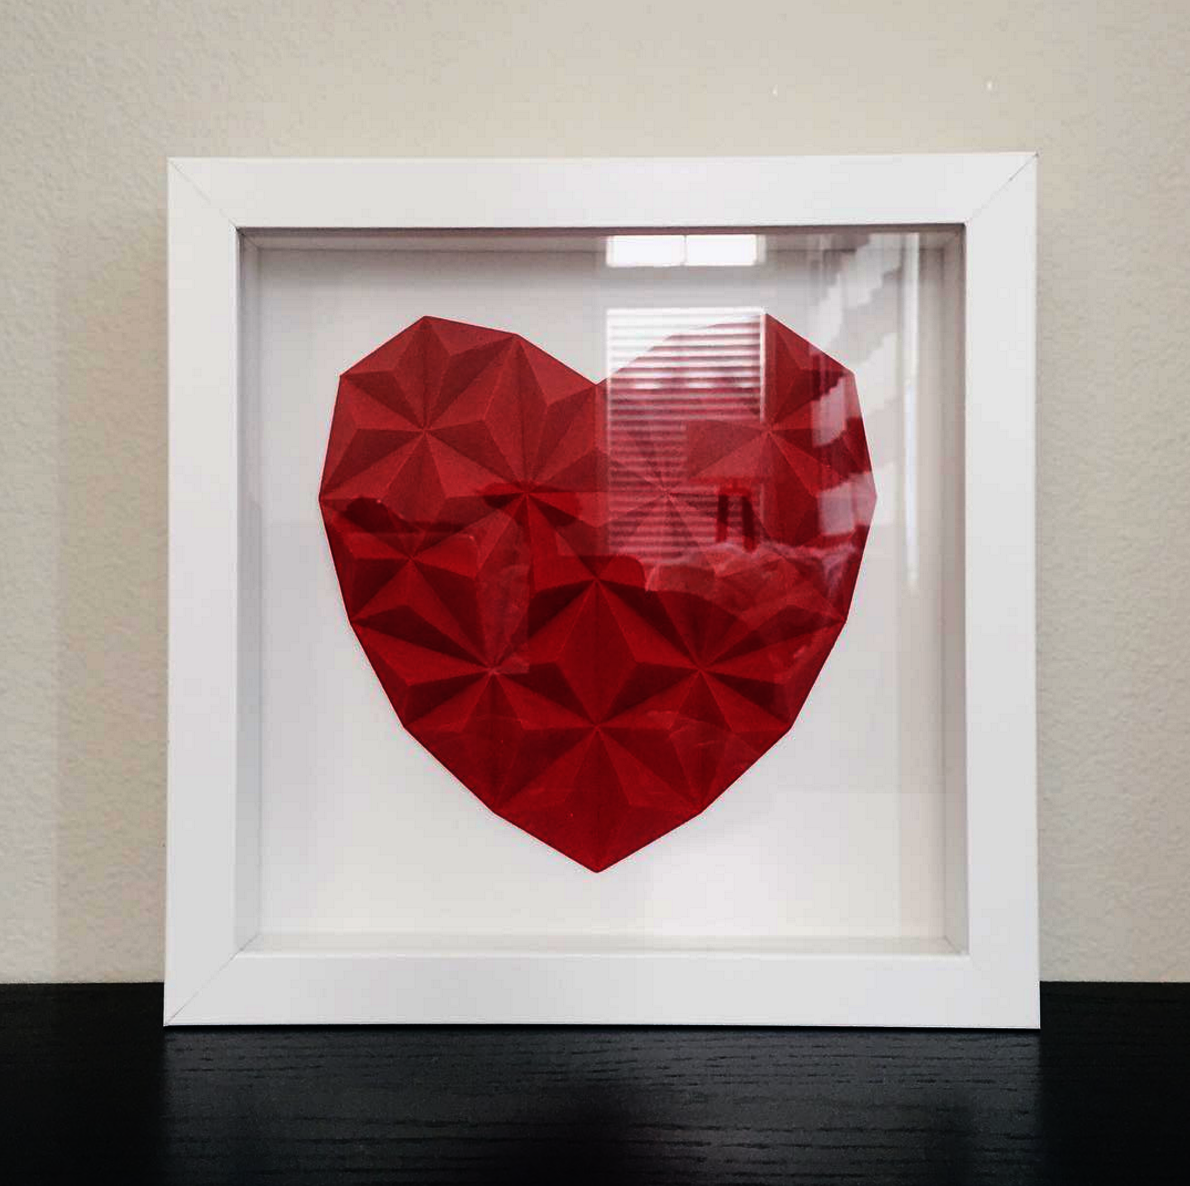 Download STL file Low Poly Heart • 3D printable object ・ Cults